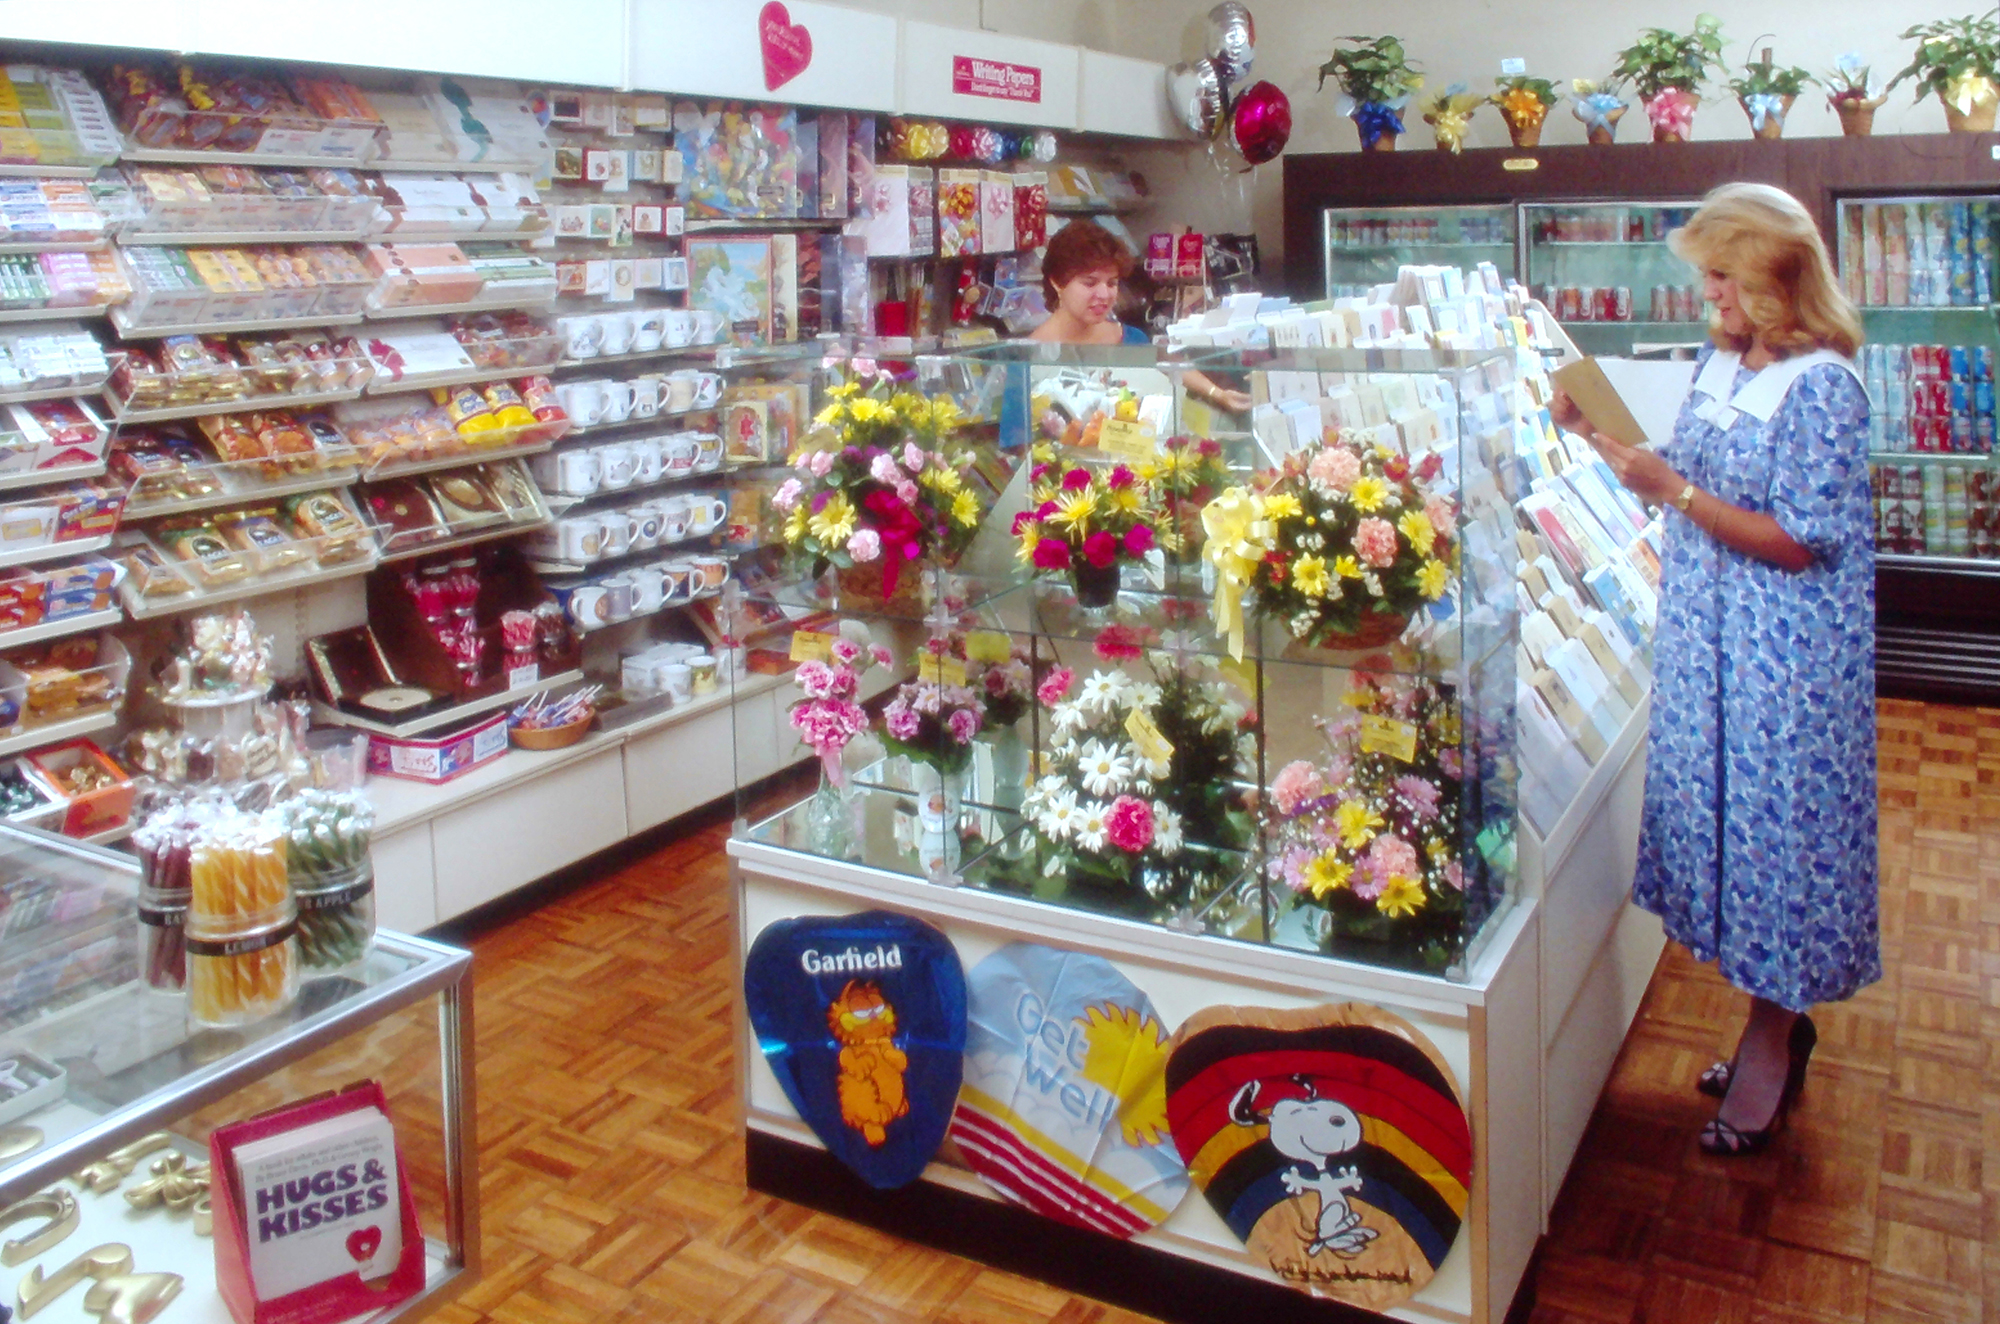 Lori's hospital gift shop in Plano, Texas in the 1980s